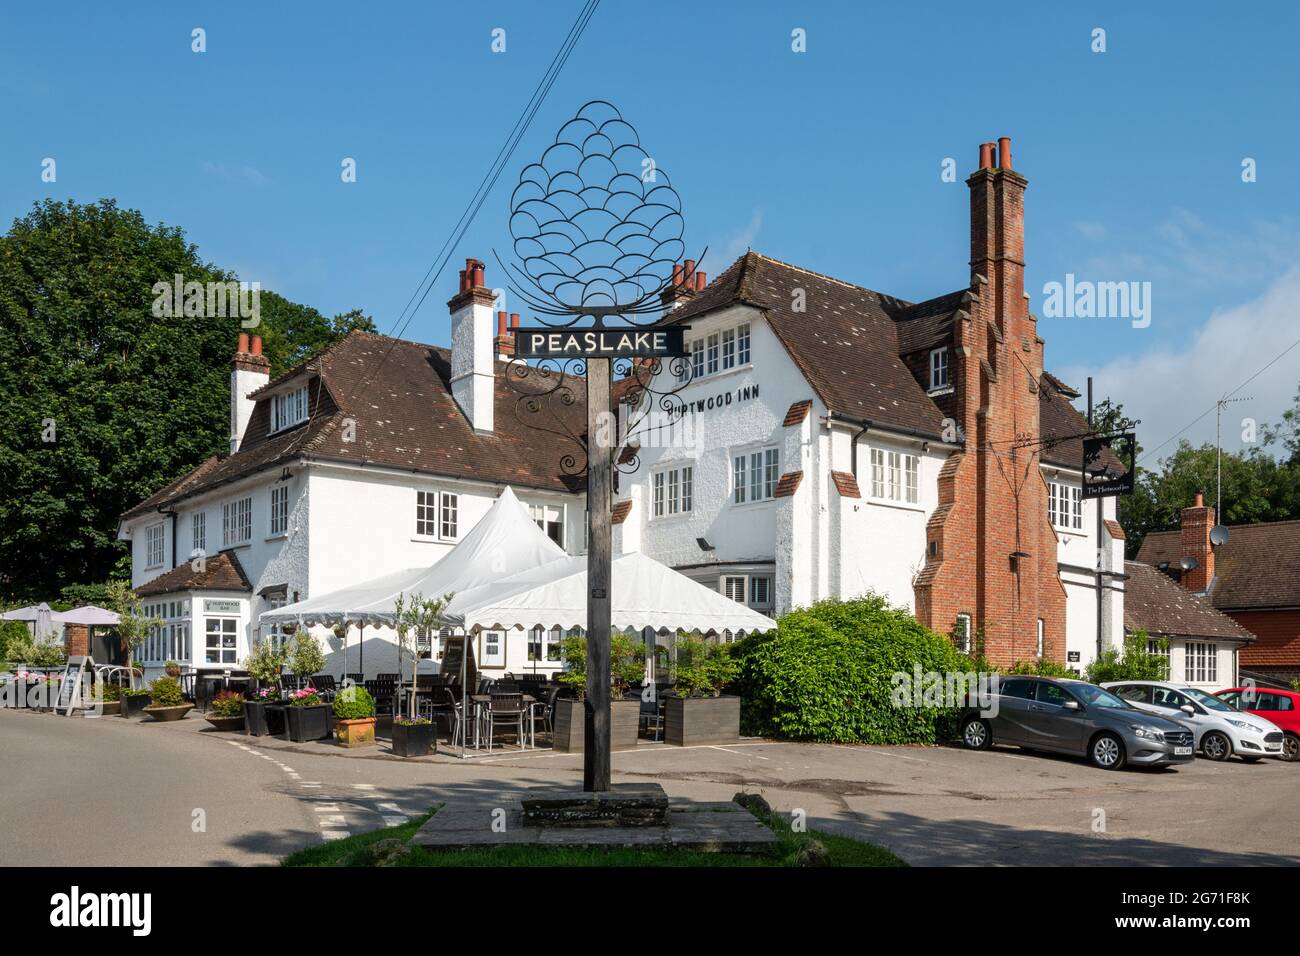 Peaslake, pretty village in the Surrey Hills AONB, England, UK. Village sign and the Hurtwood Inn. Stock Photo